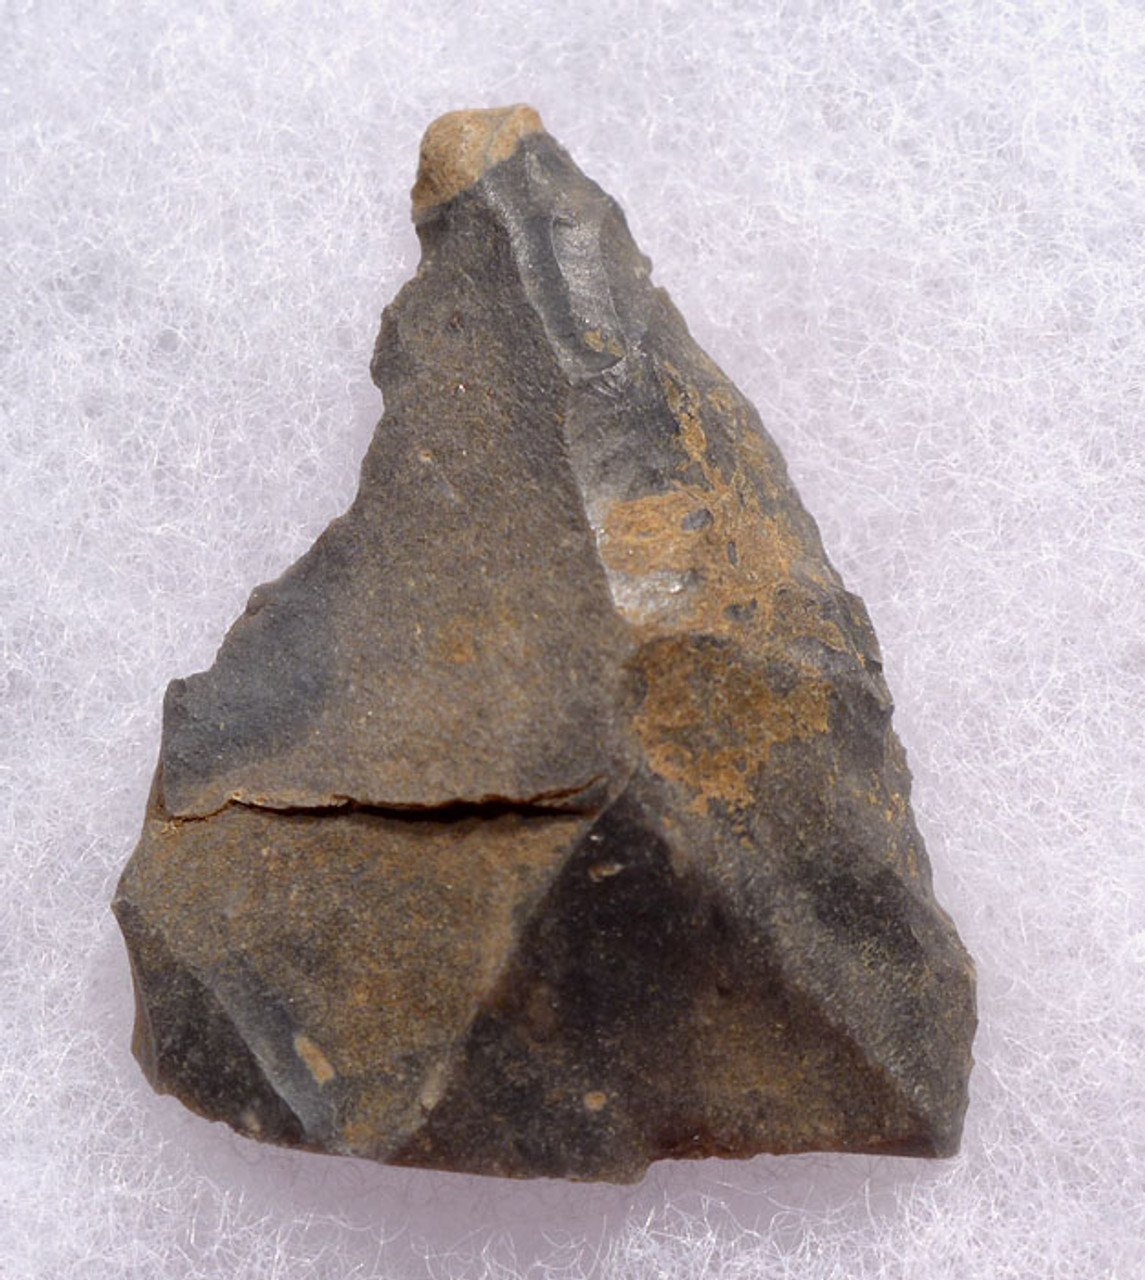 M370 - FINEST MOUSTERIAN NEANDERTHAL ENGRAVER FLAKE TOOL FROM FRANCE WITH AESTHETIC COLOR FEATURE